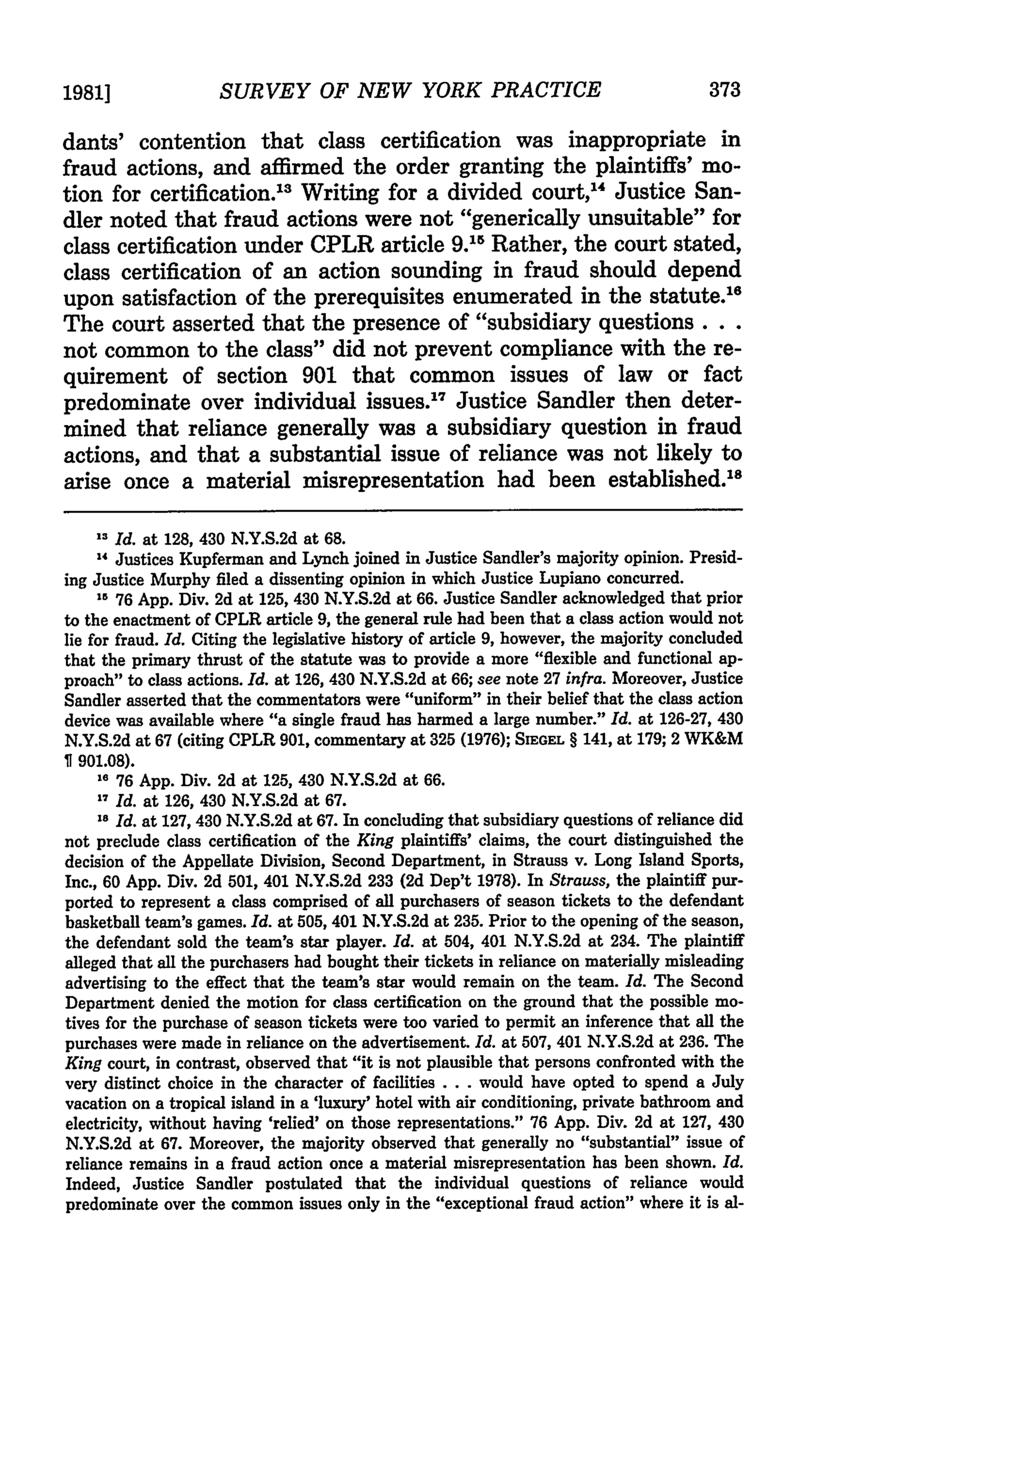 1981] SURVEY OF NEW YORK PRACTICE dants' contention that class certification was inappropriate in fraud actions, and affirmed the order granting the plaintiffs' motion for certification.